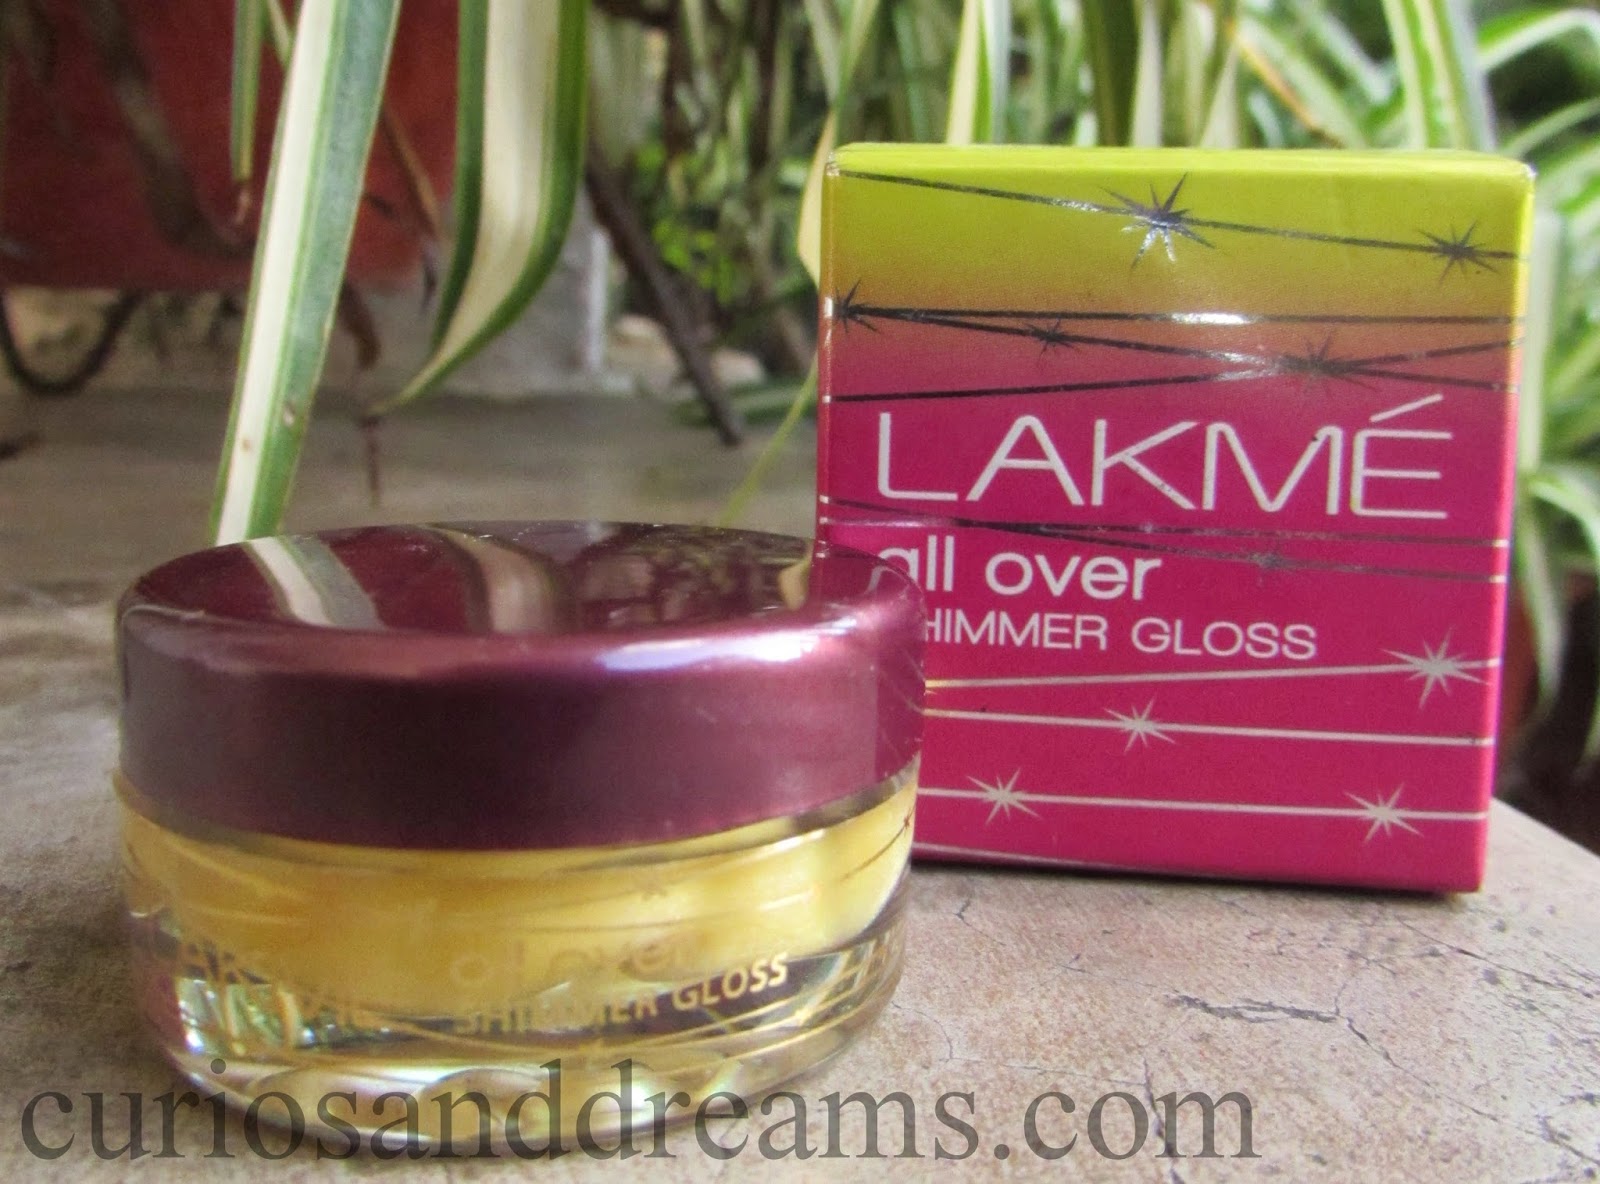 Lakme All Over Shimmer Gloss Review